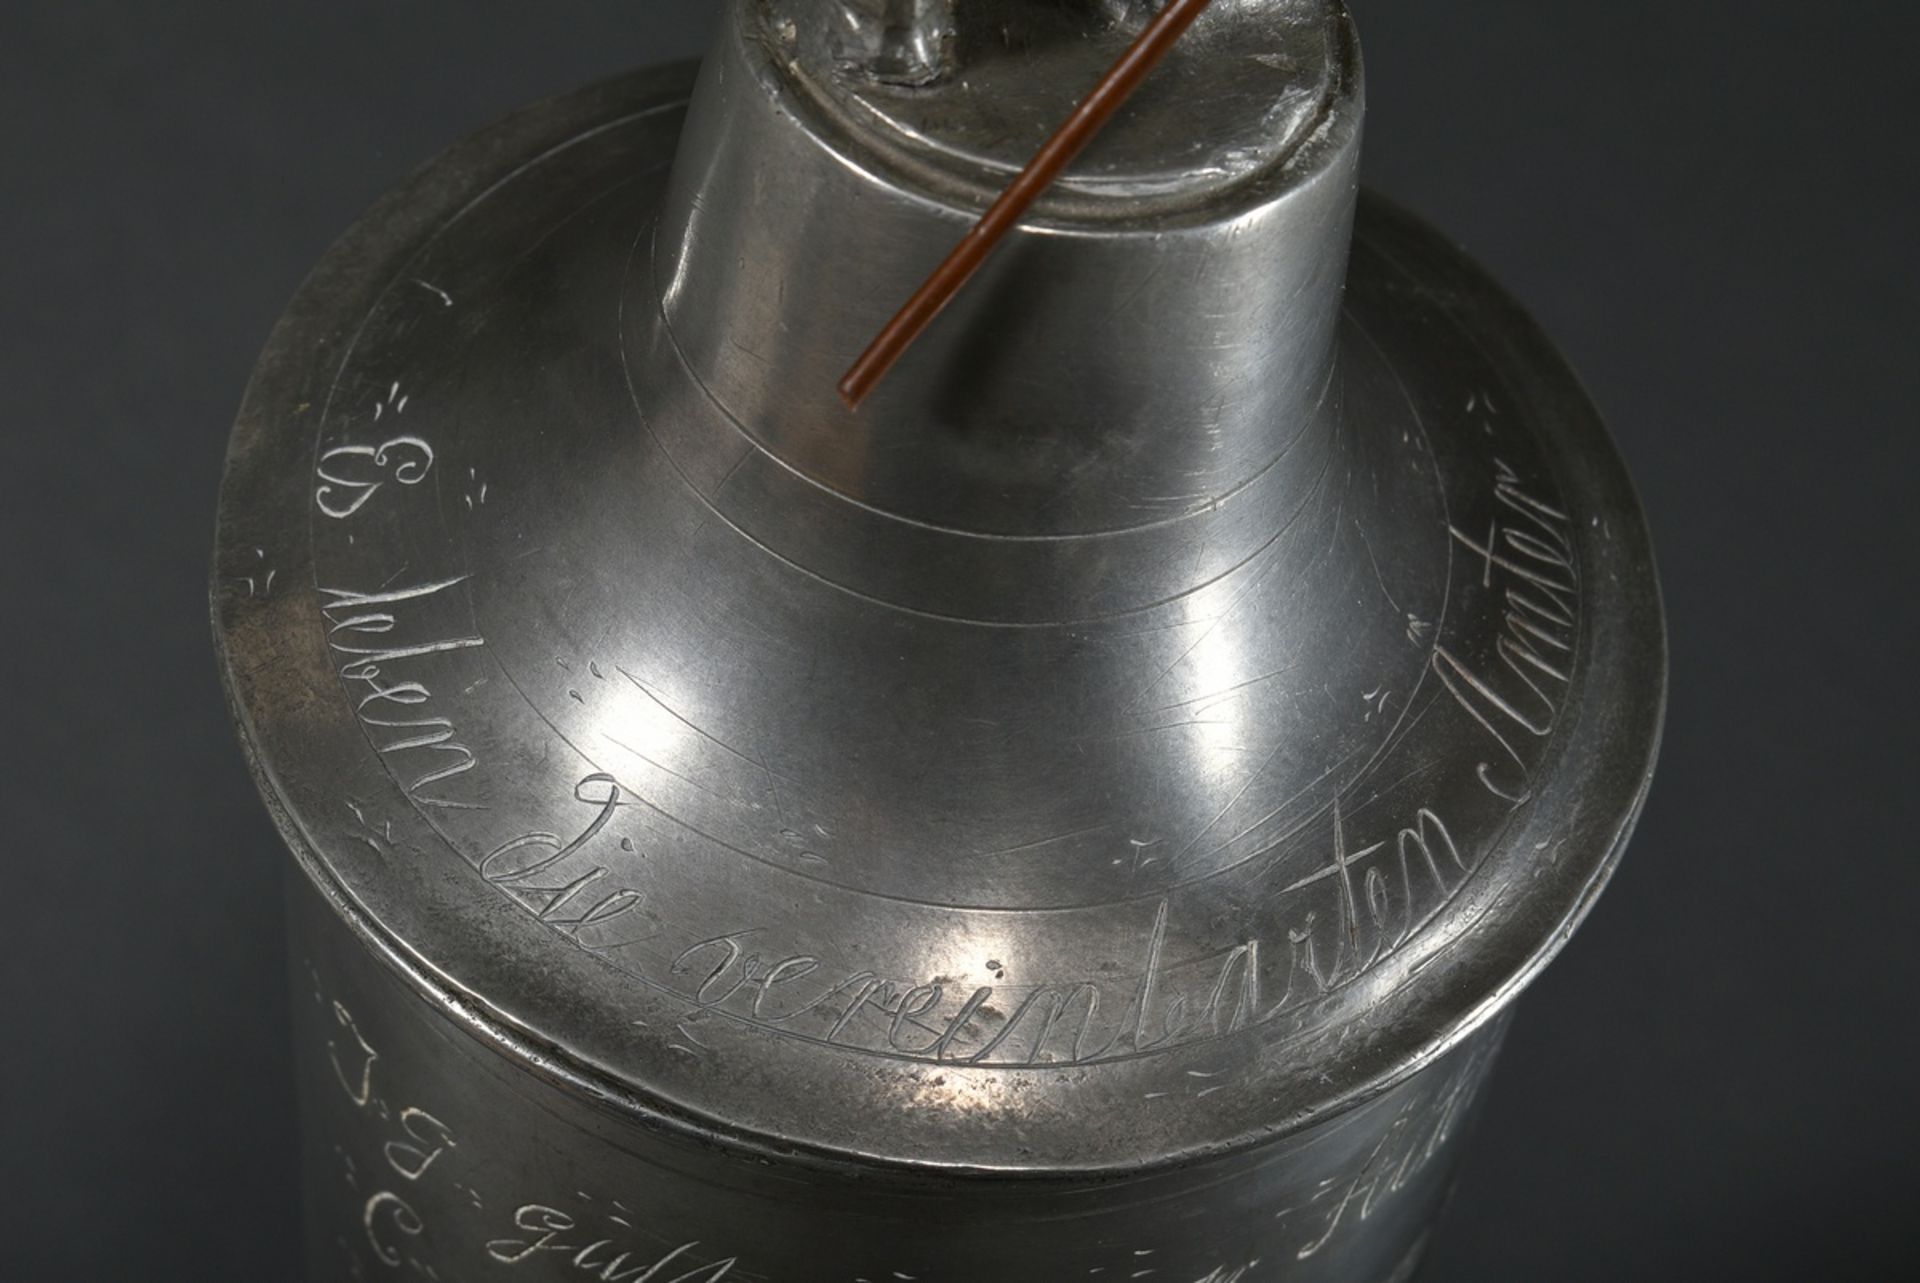 Large pewter guild cup "Willkomm" with plastic lid crowning "flag bearer", engraved inscription "Es - Image 10 of 12